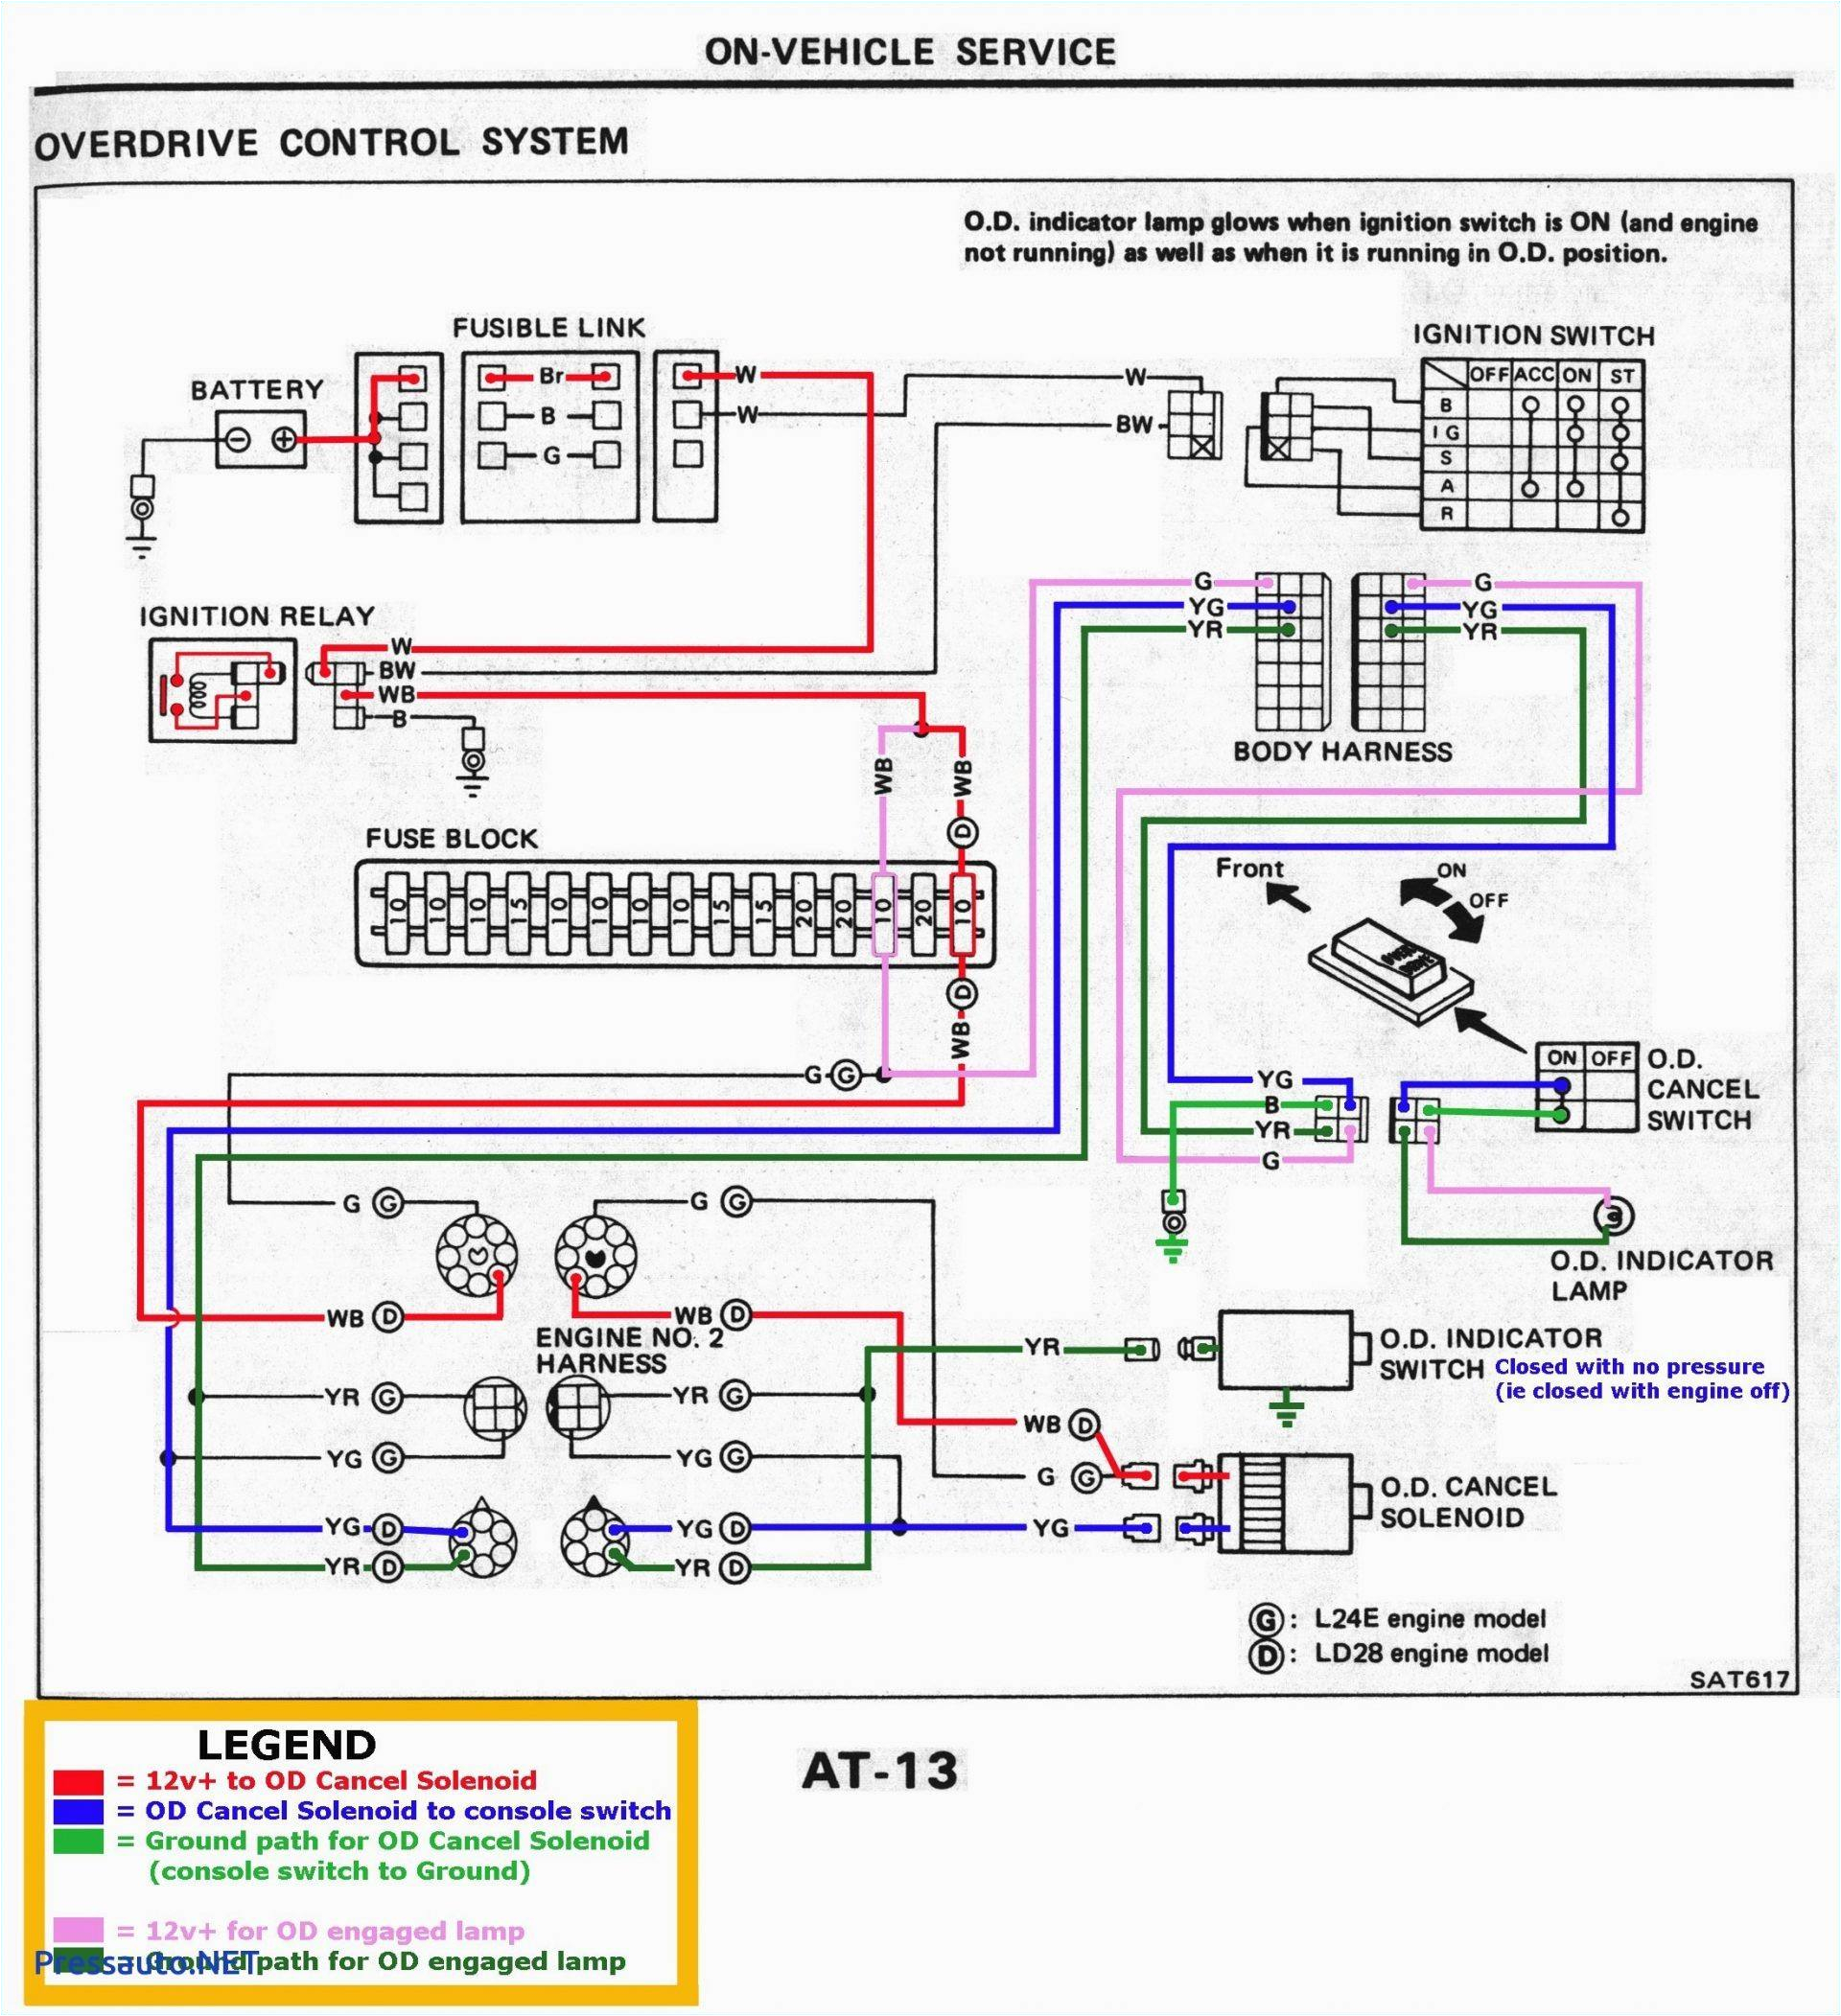 Tail Light Wiring Diagram 1995 Chevy Truck Headlight Tail Light Wiring Diagram Wiring Diagram for You